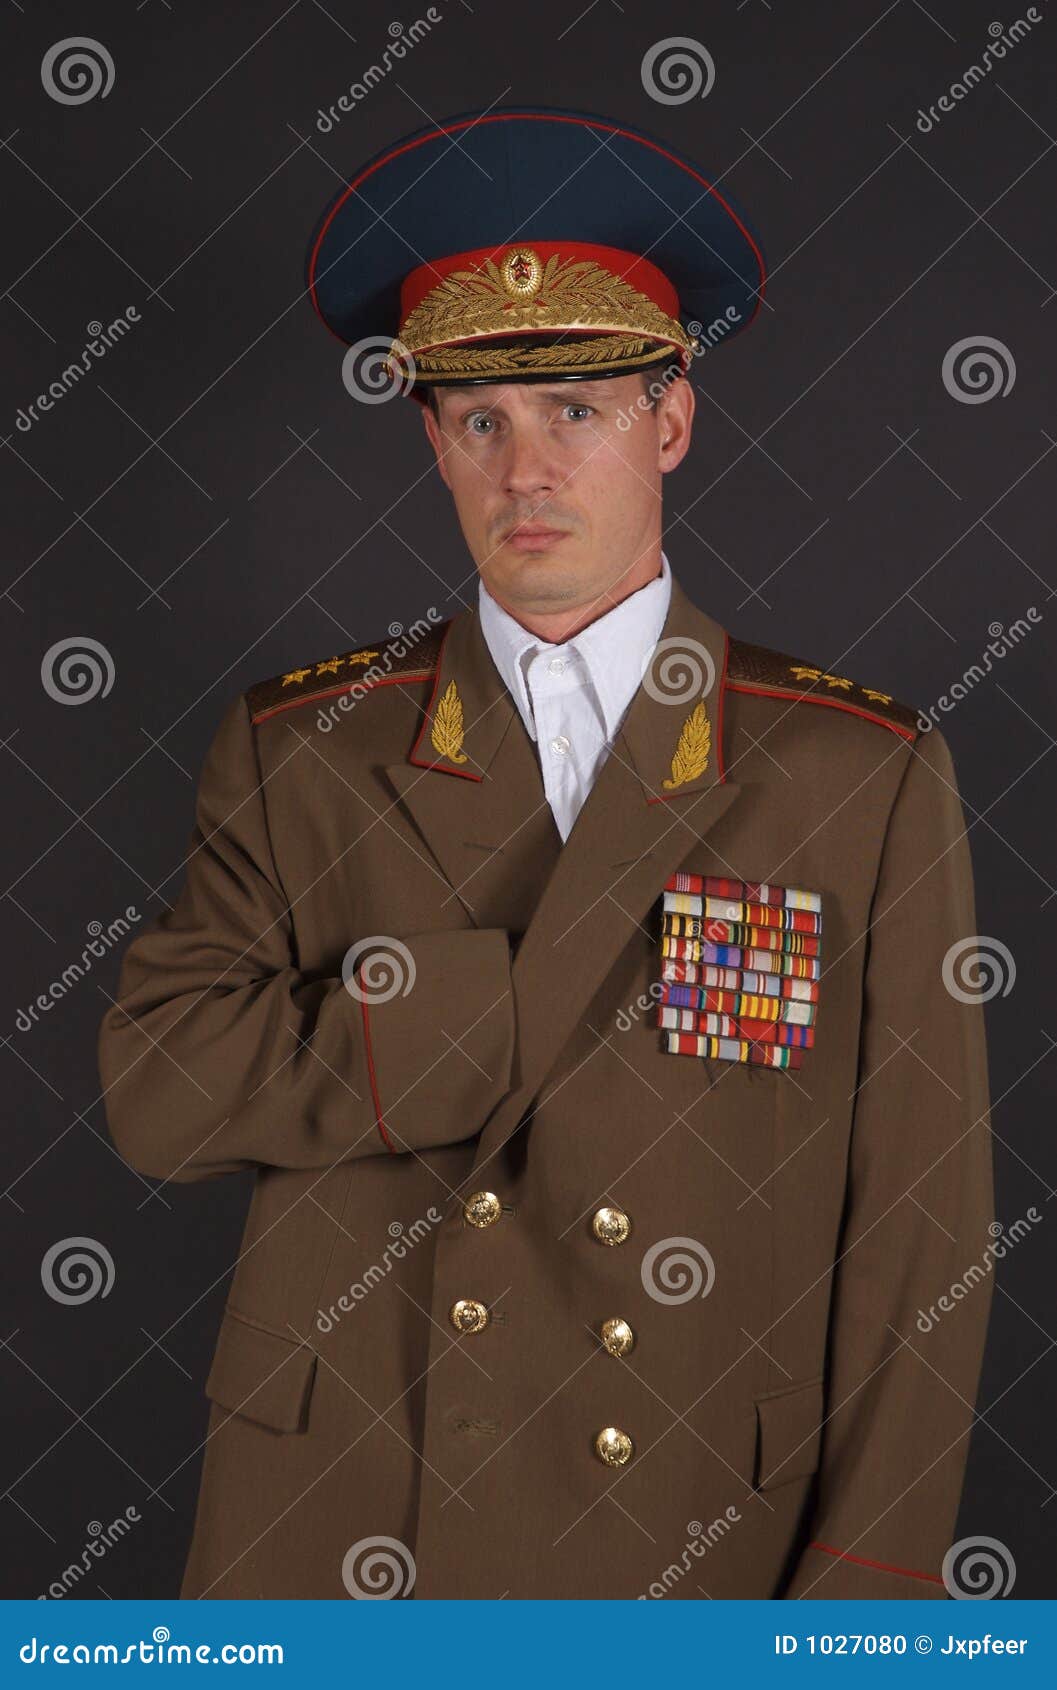 Army Potrait stock photo. Image of jacket, rank, foreign - 1027080